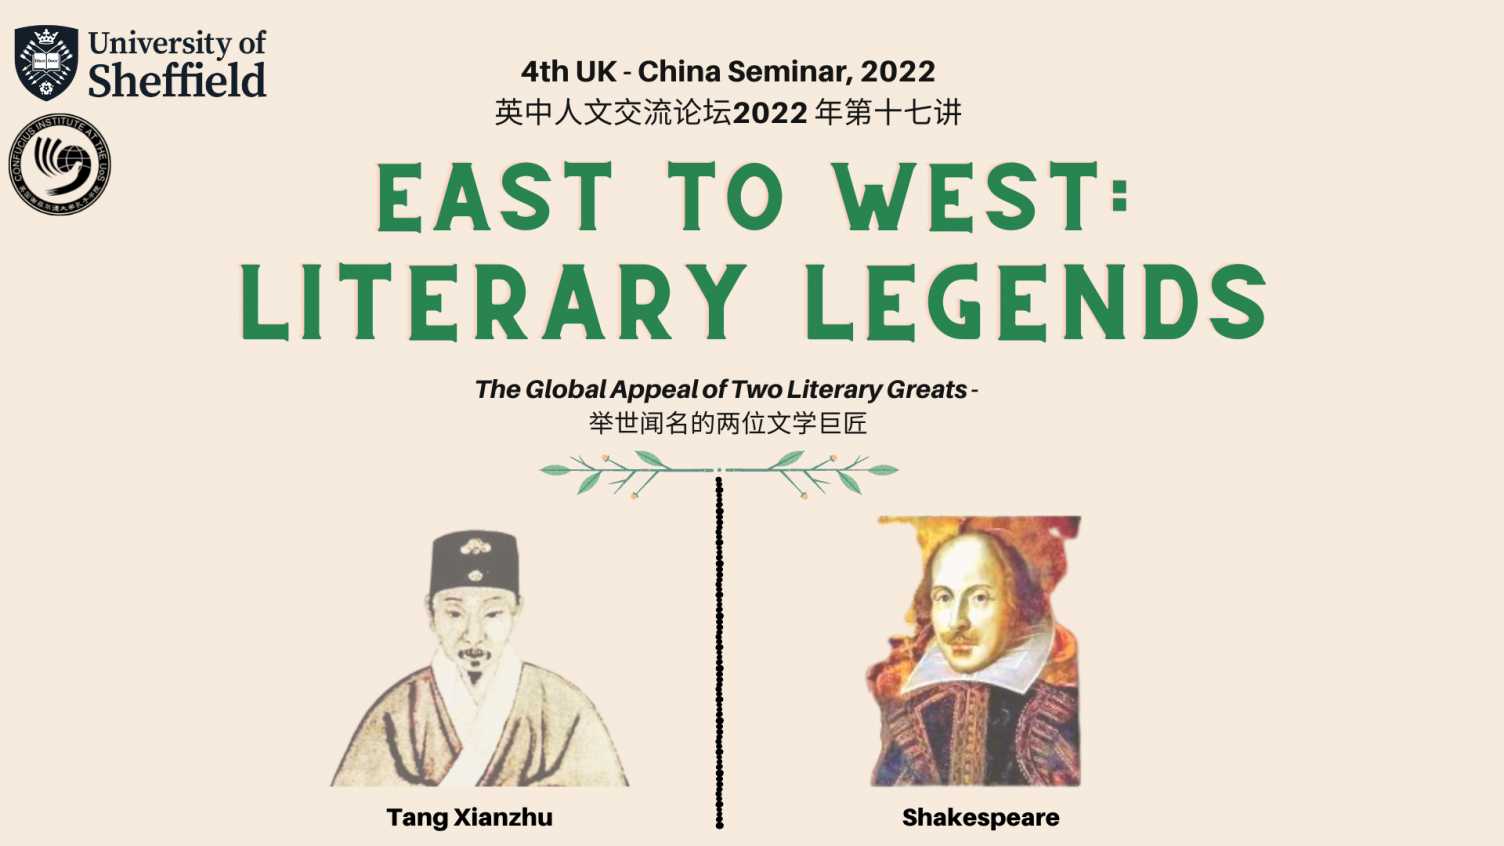 Thumbnail for China - UK Seminar IV - East to West: The Global Appeal of Tang Xianzhu and Shak…